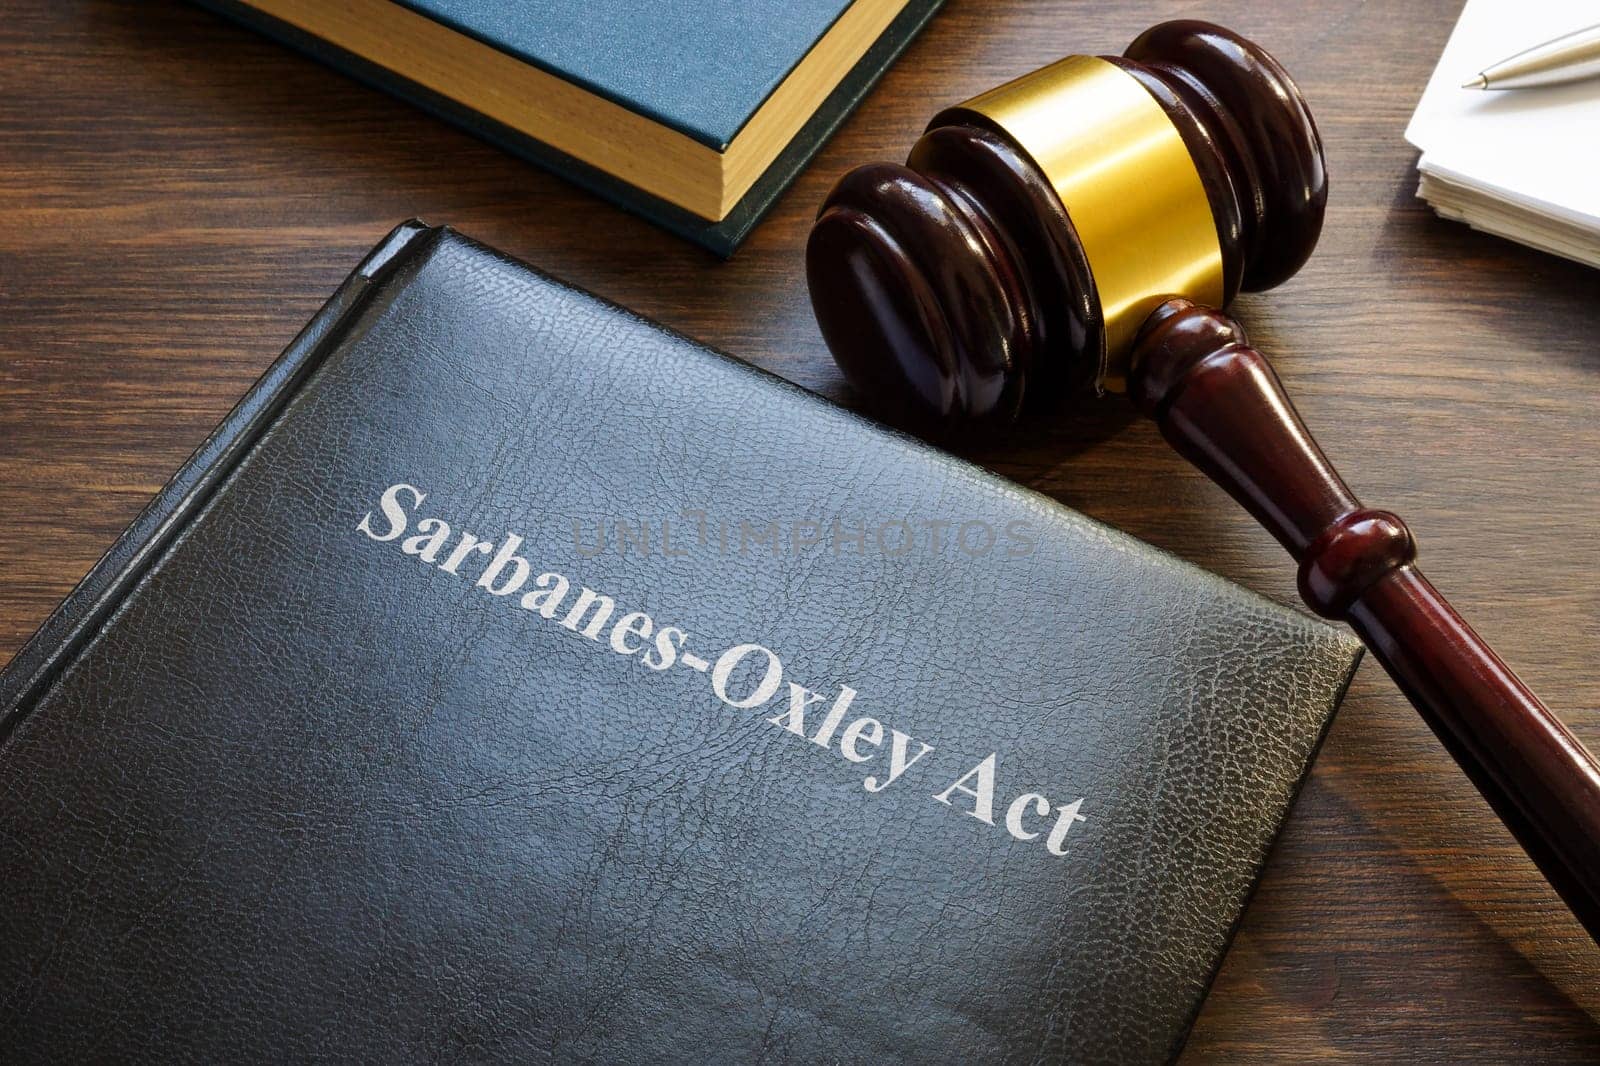 Sarbanes-Oxley act. Book with laws and gavel on the table.